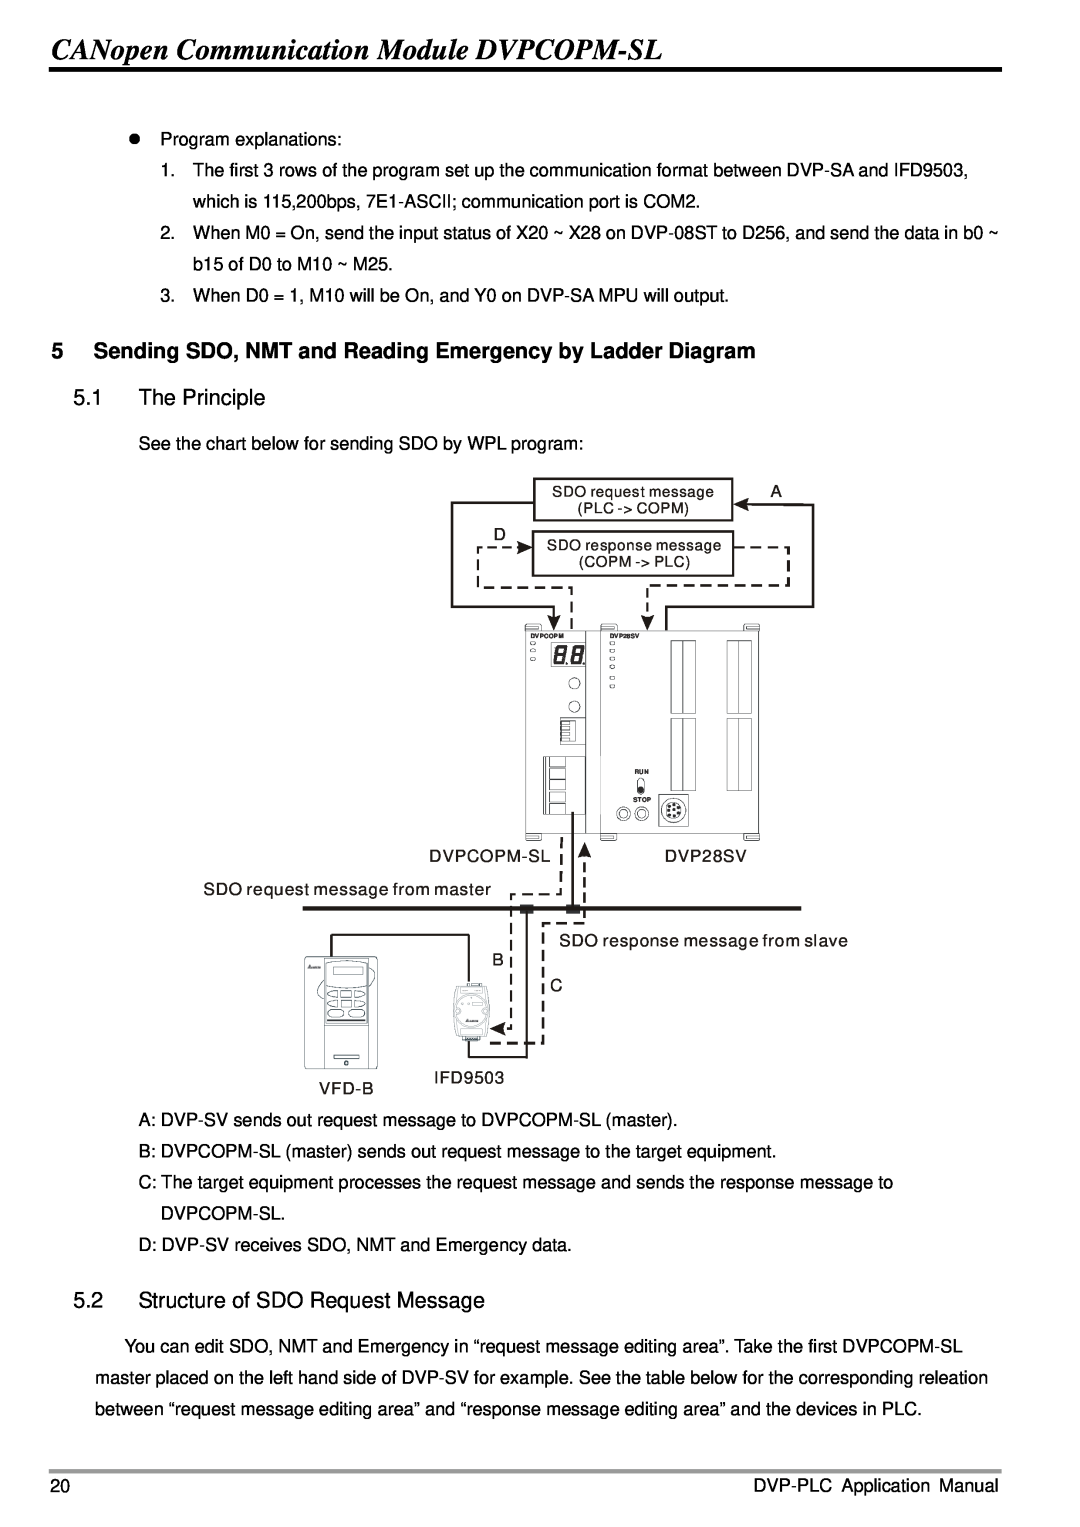 Delta Electronics DVPCOPM-SL manual Sending SDO, NMT and Reading Emergency by Ladder Diagram, The Principle 